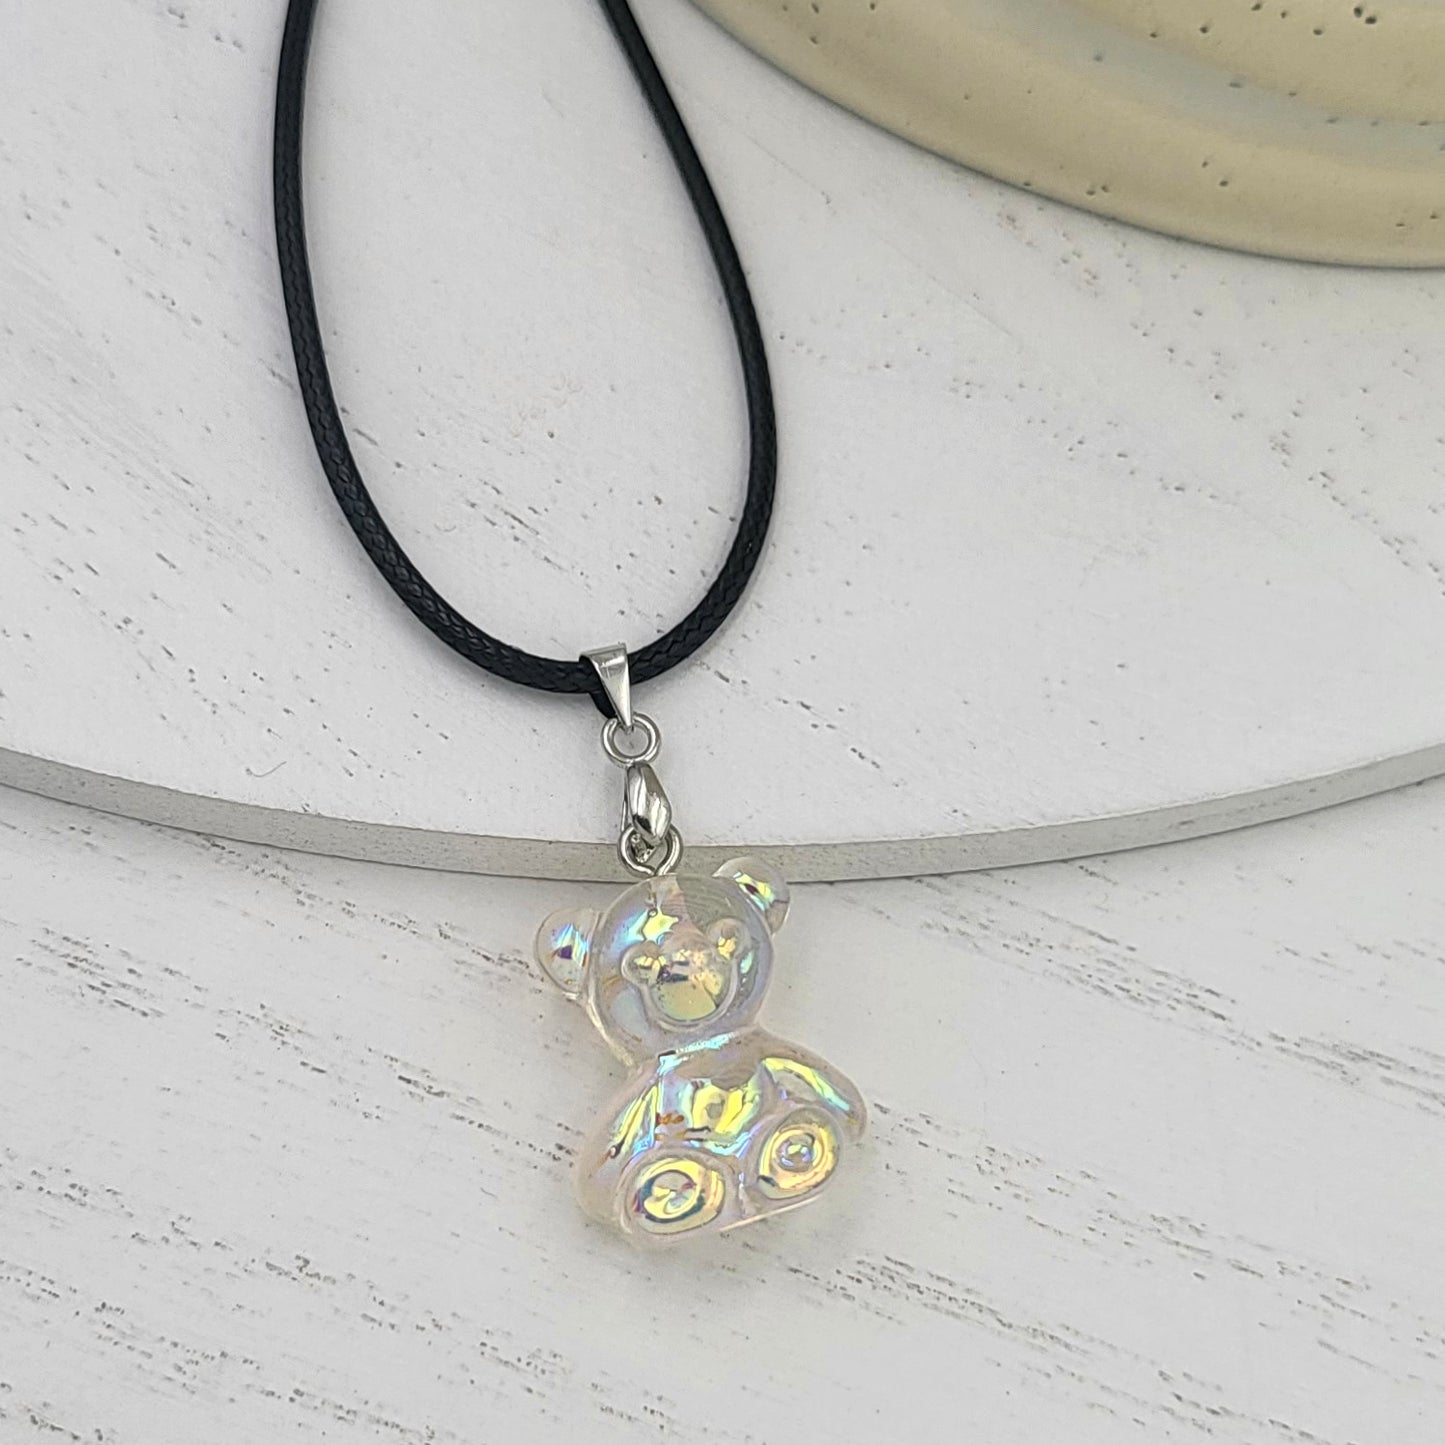 BESHEEK Silvertone and Clear AB Resin Gummy Bear Pendant Necklace | Hypoallergenic Boho Kitchsy Artistic Funky Cute Style Fashion Necklace